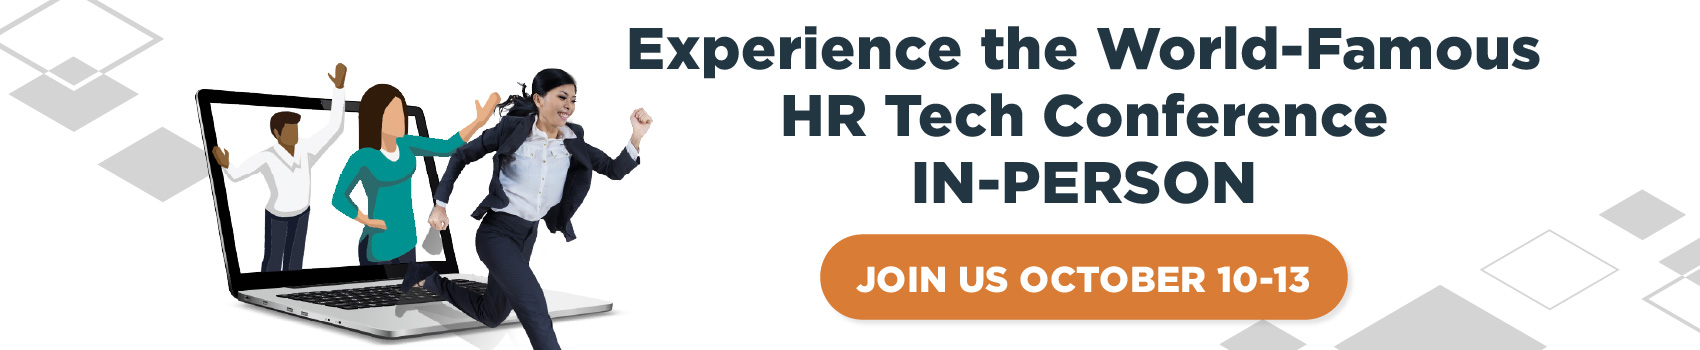 Experience the World-Famous HR Tech Conference In-Person GET DETAILS